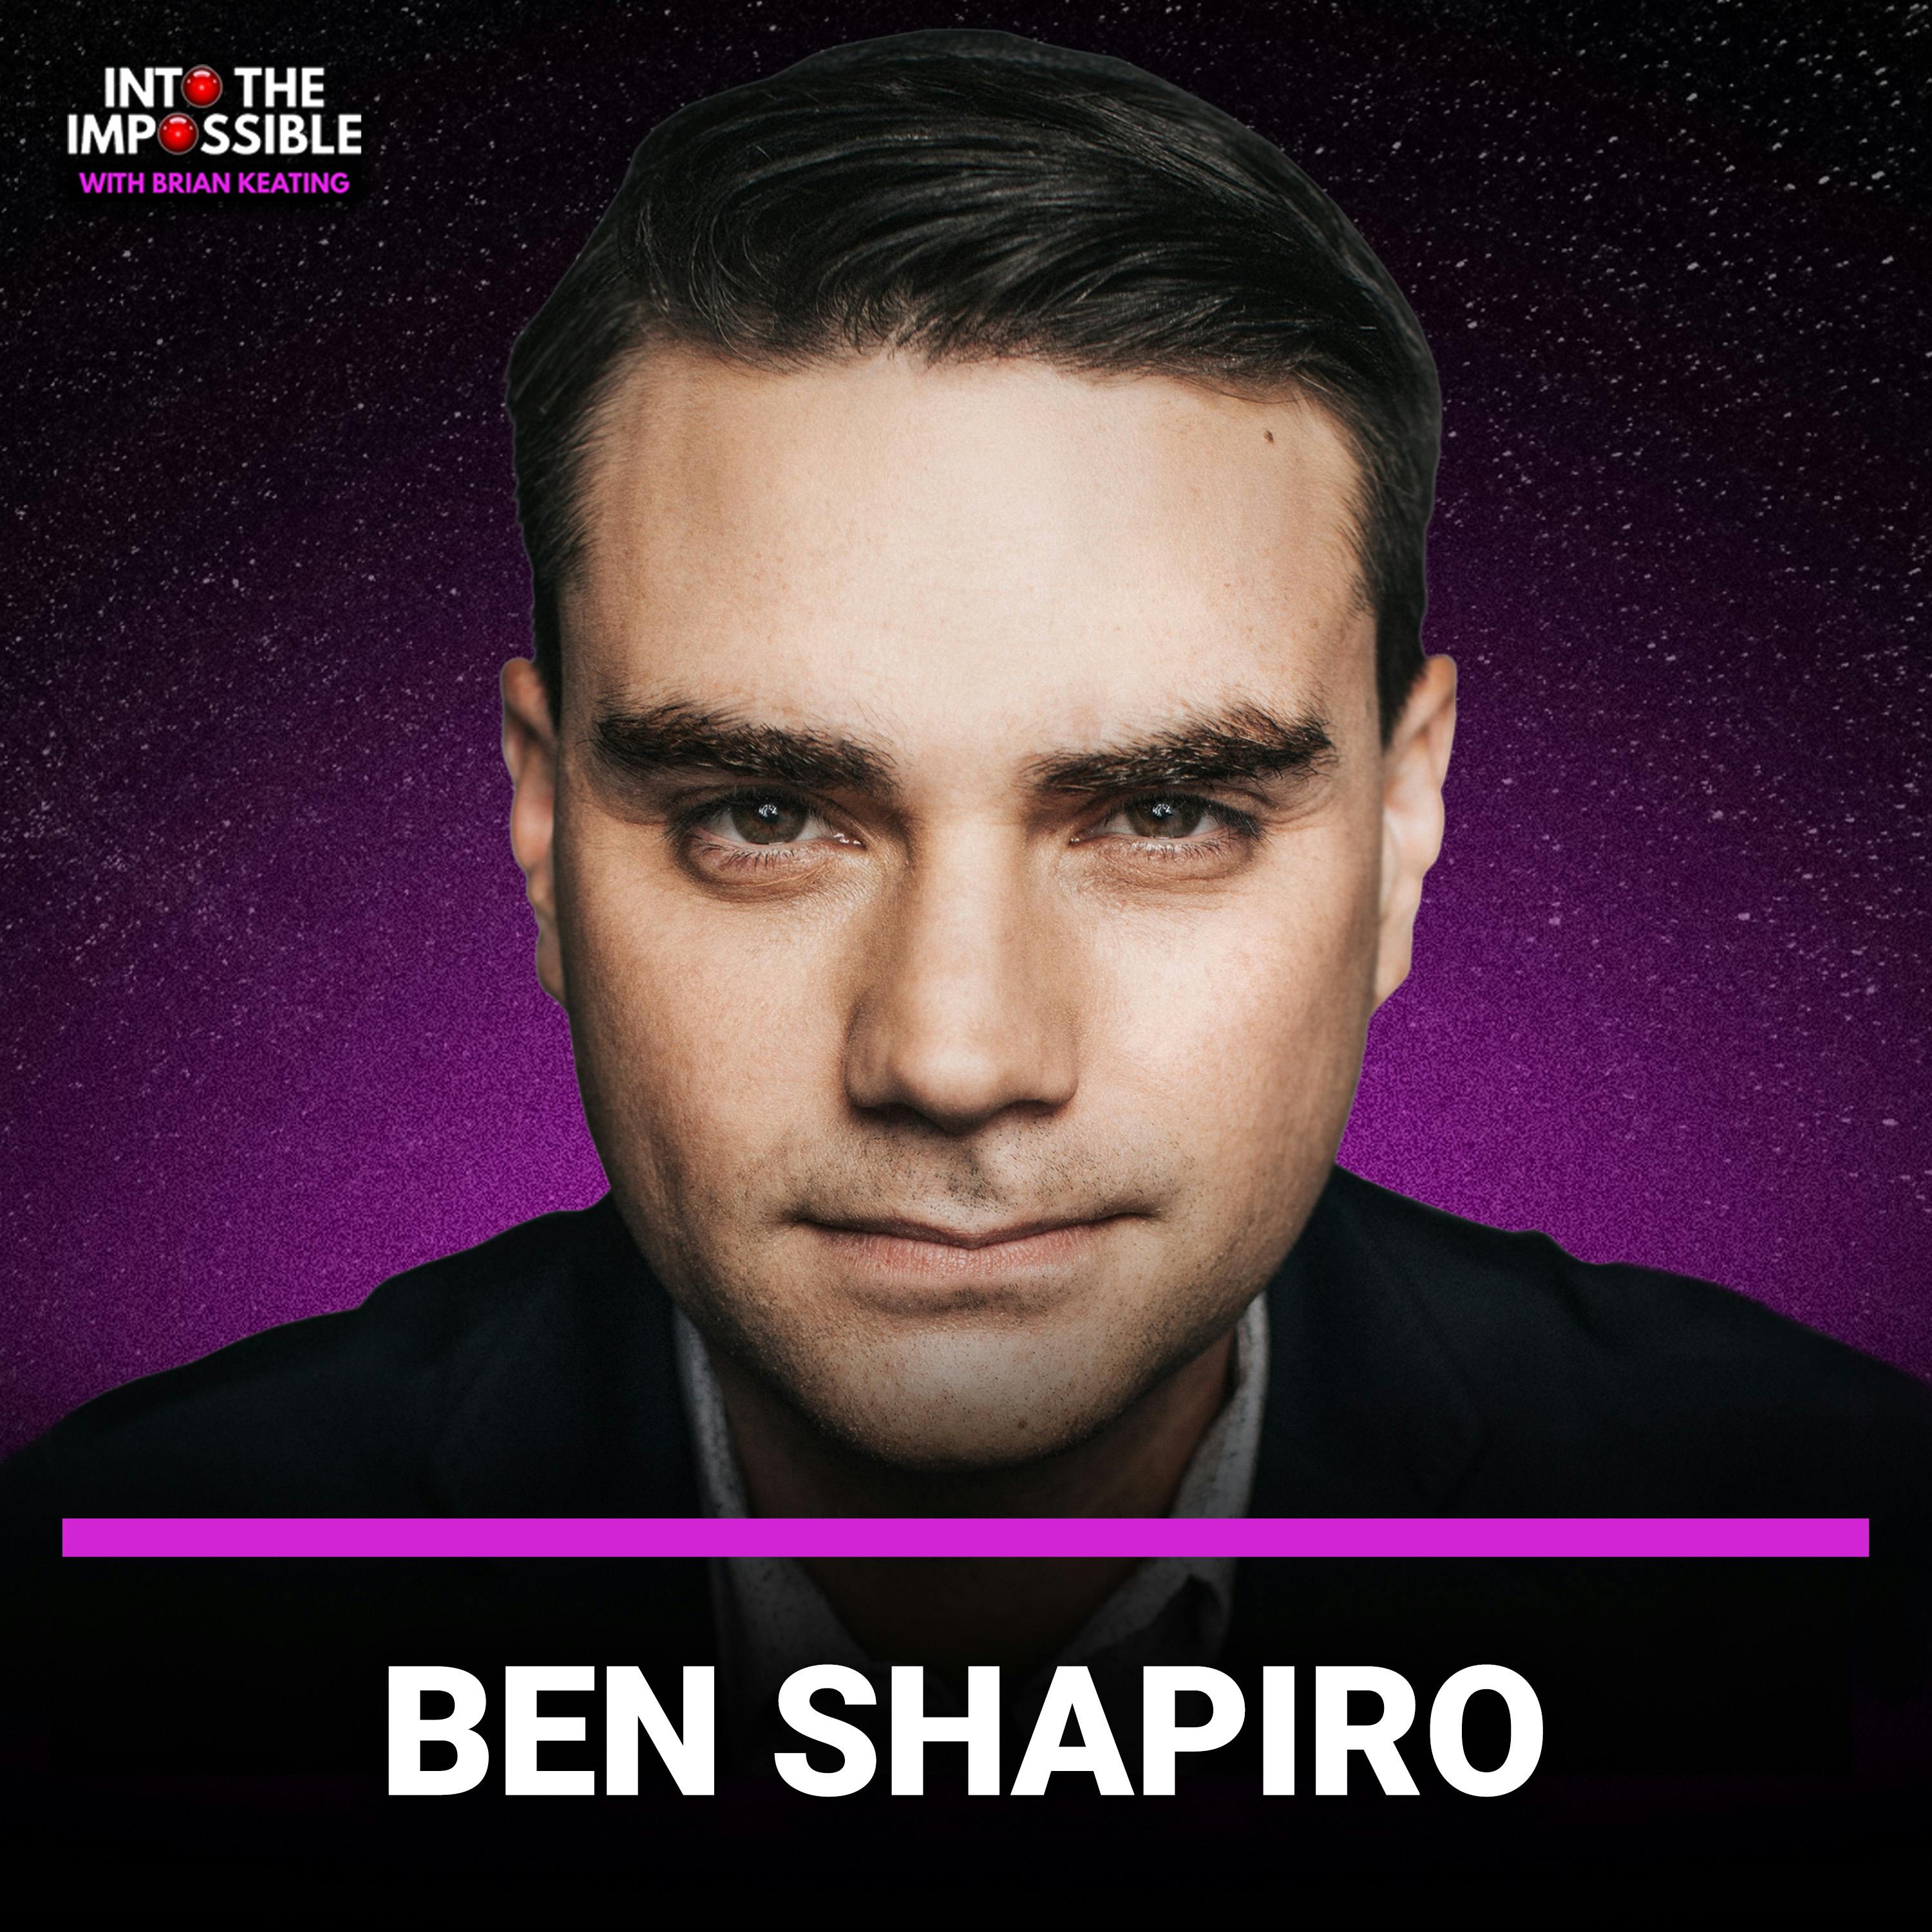 Who Is Ben Shapiro BEYOND Politics? Daily Routine, Religion, Dream Guest and Science Fiction (#356)